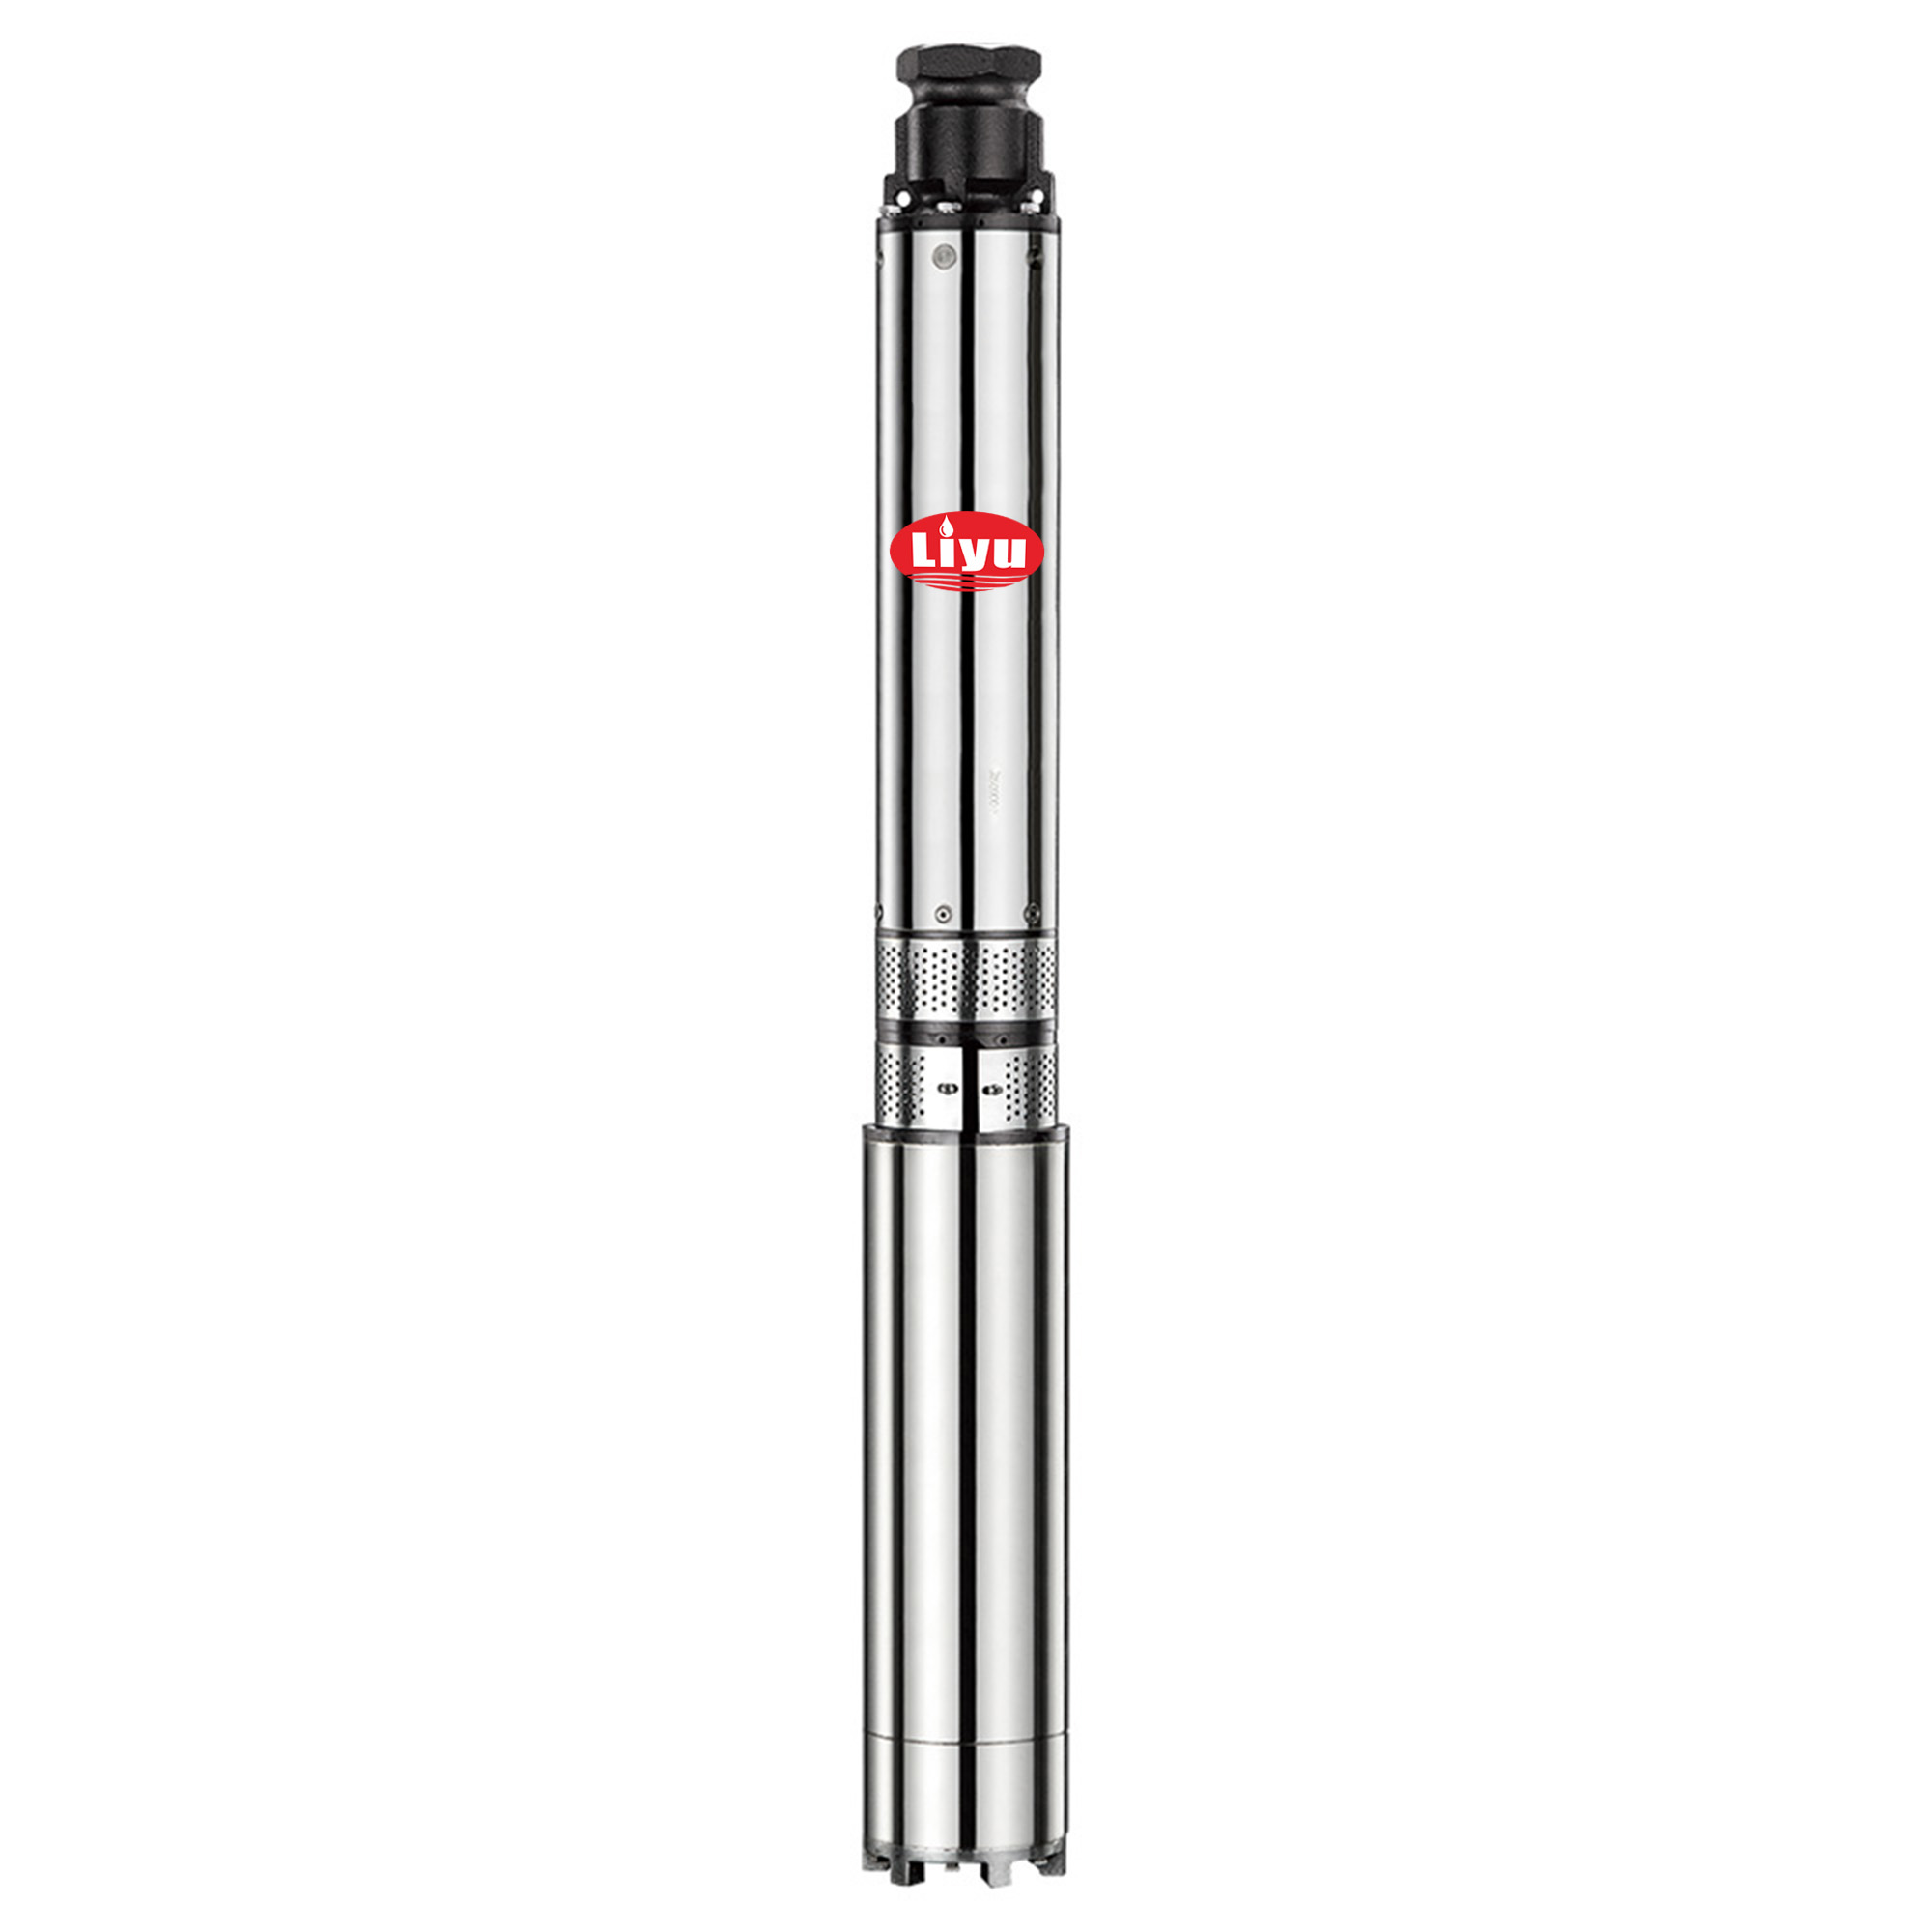 5QJ 8 Stainless Steel Submersible Pump